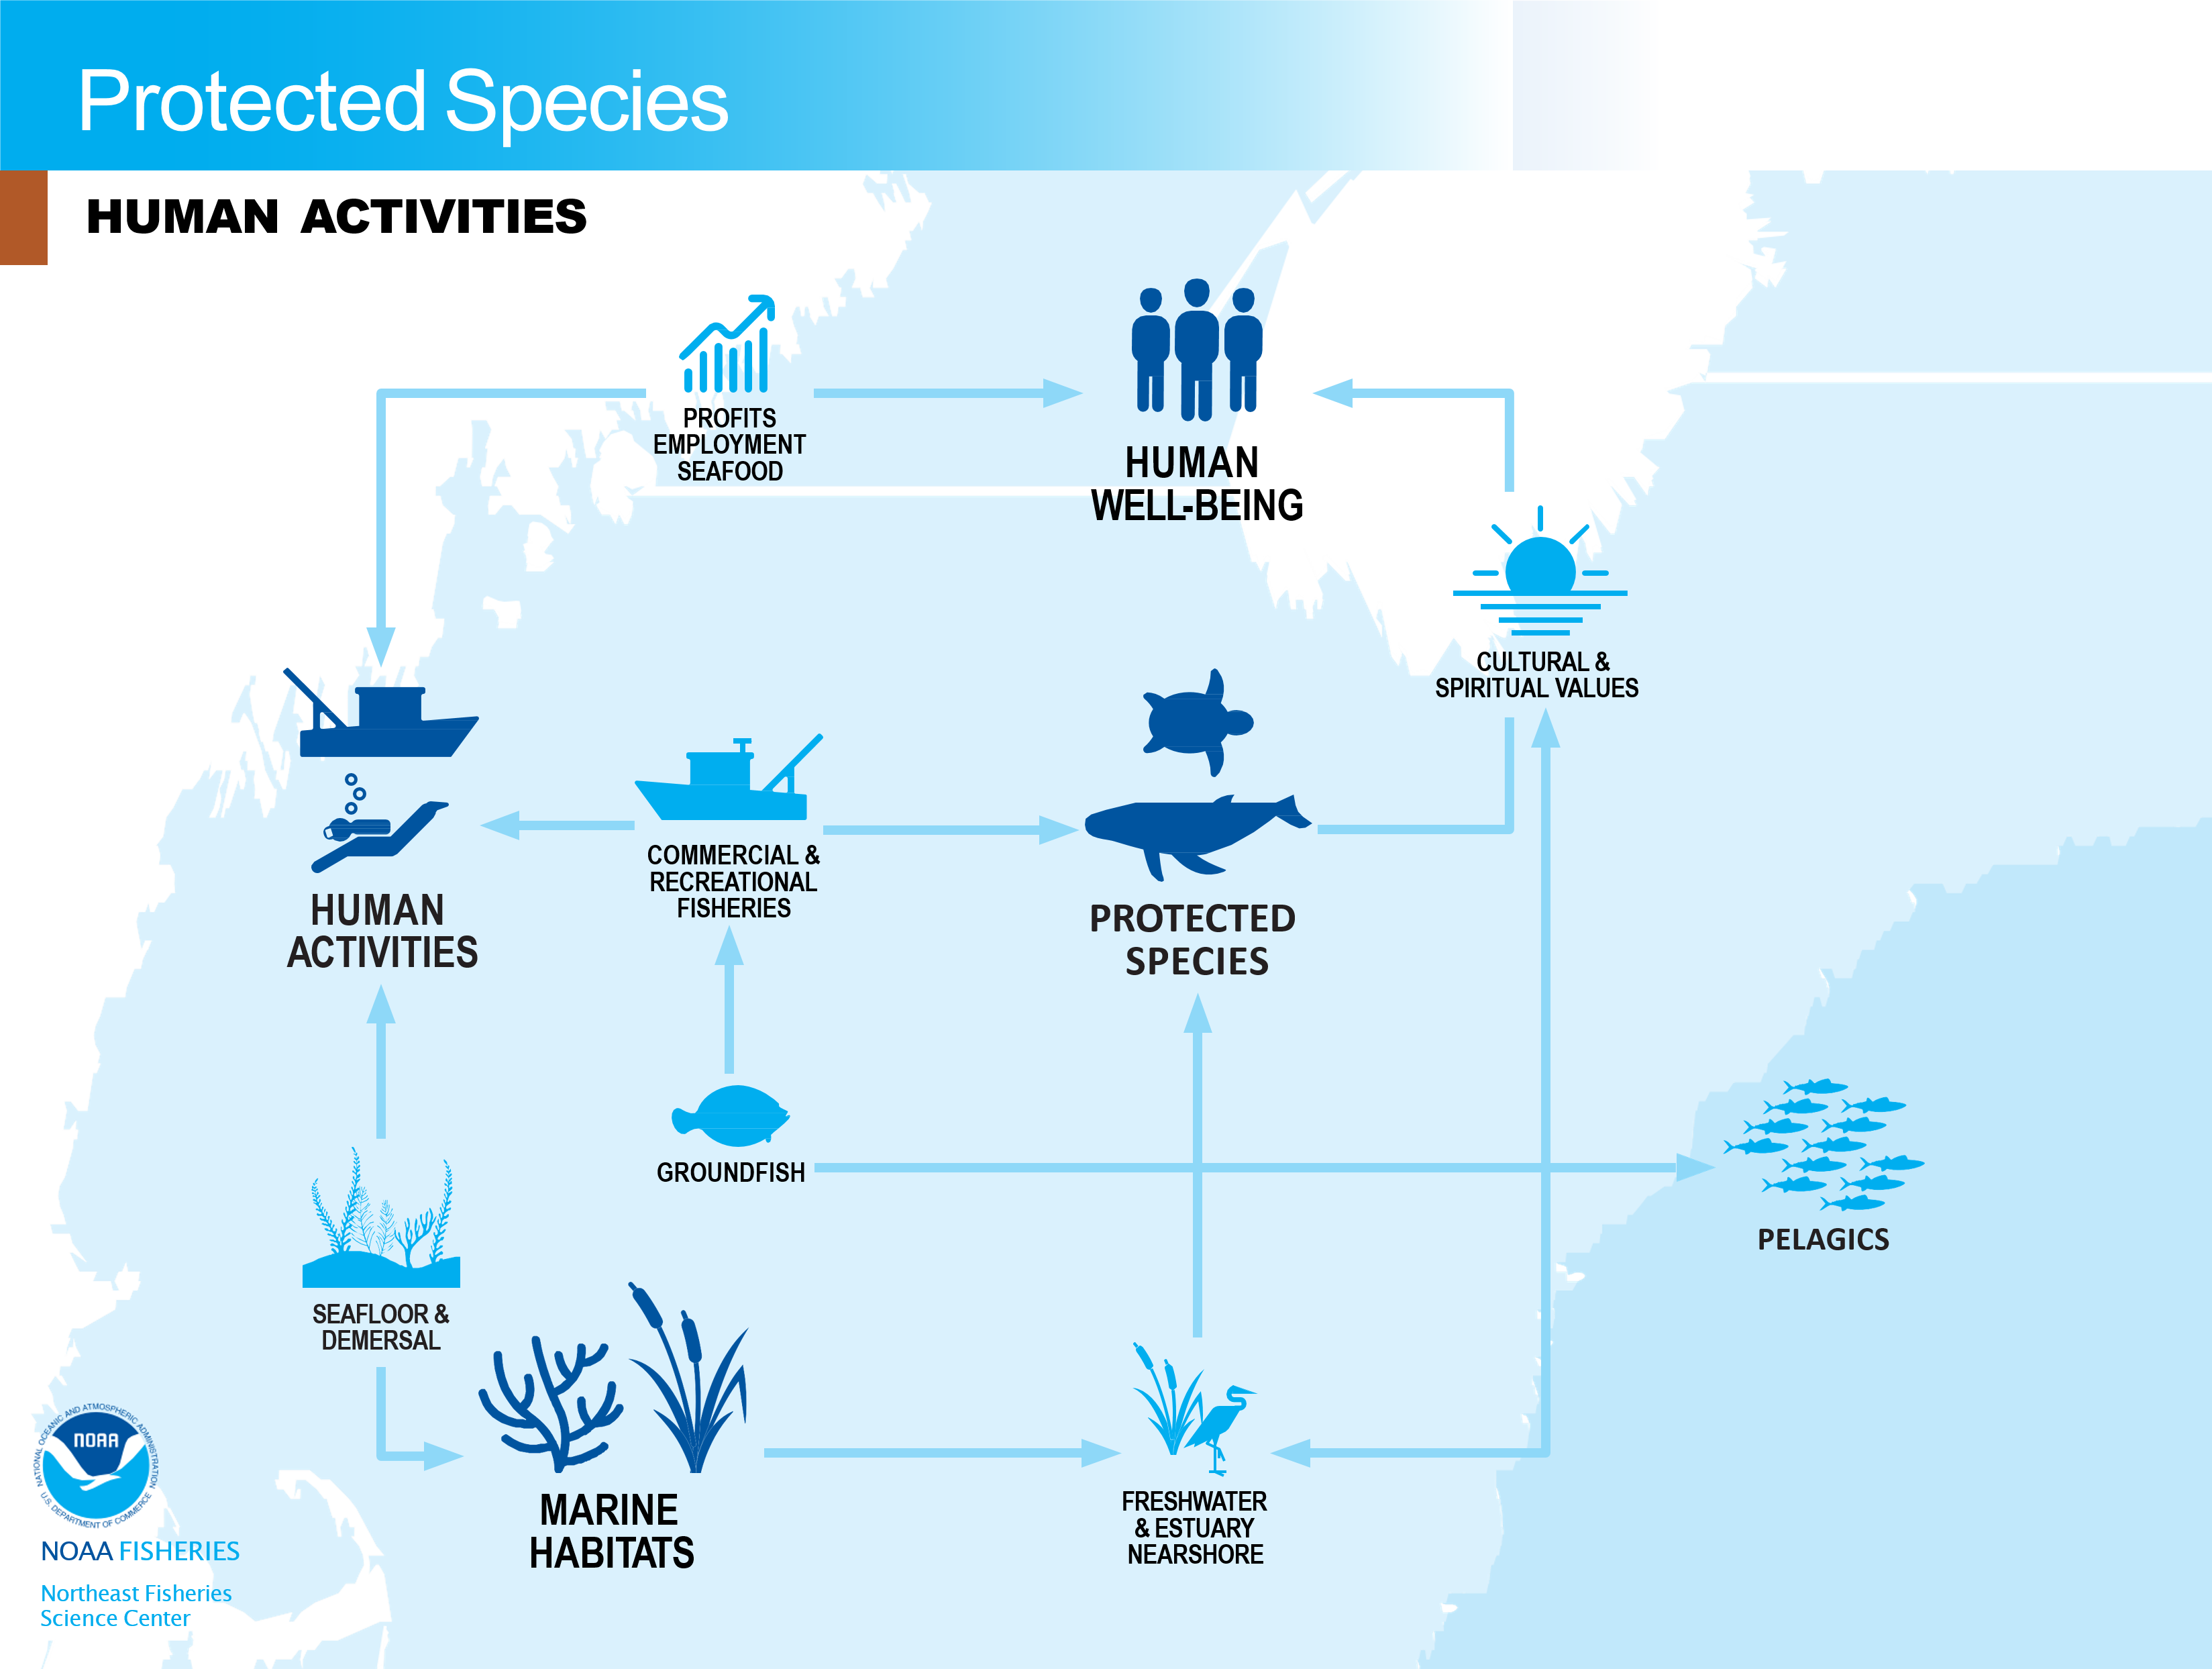 Conceptual model of human activities related to protected species